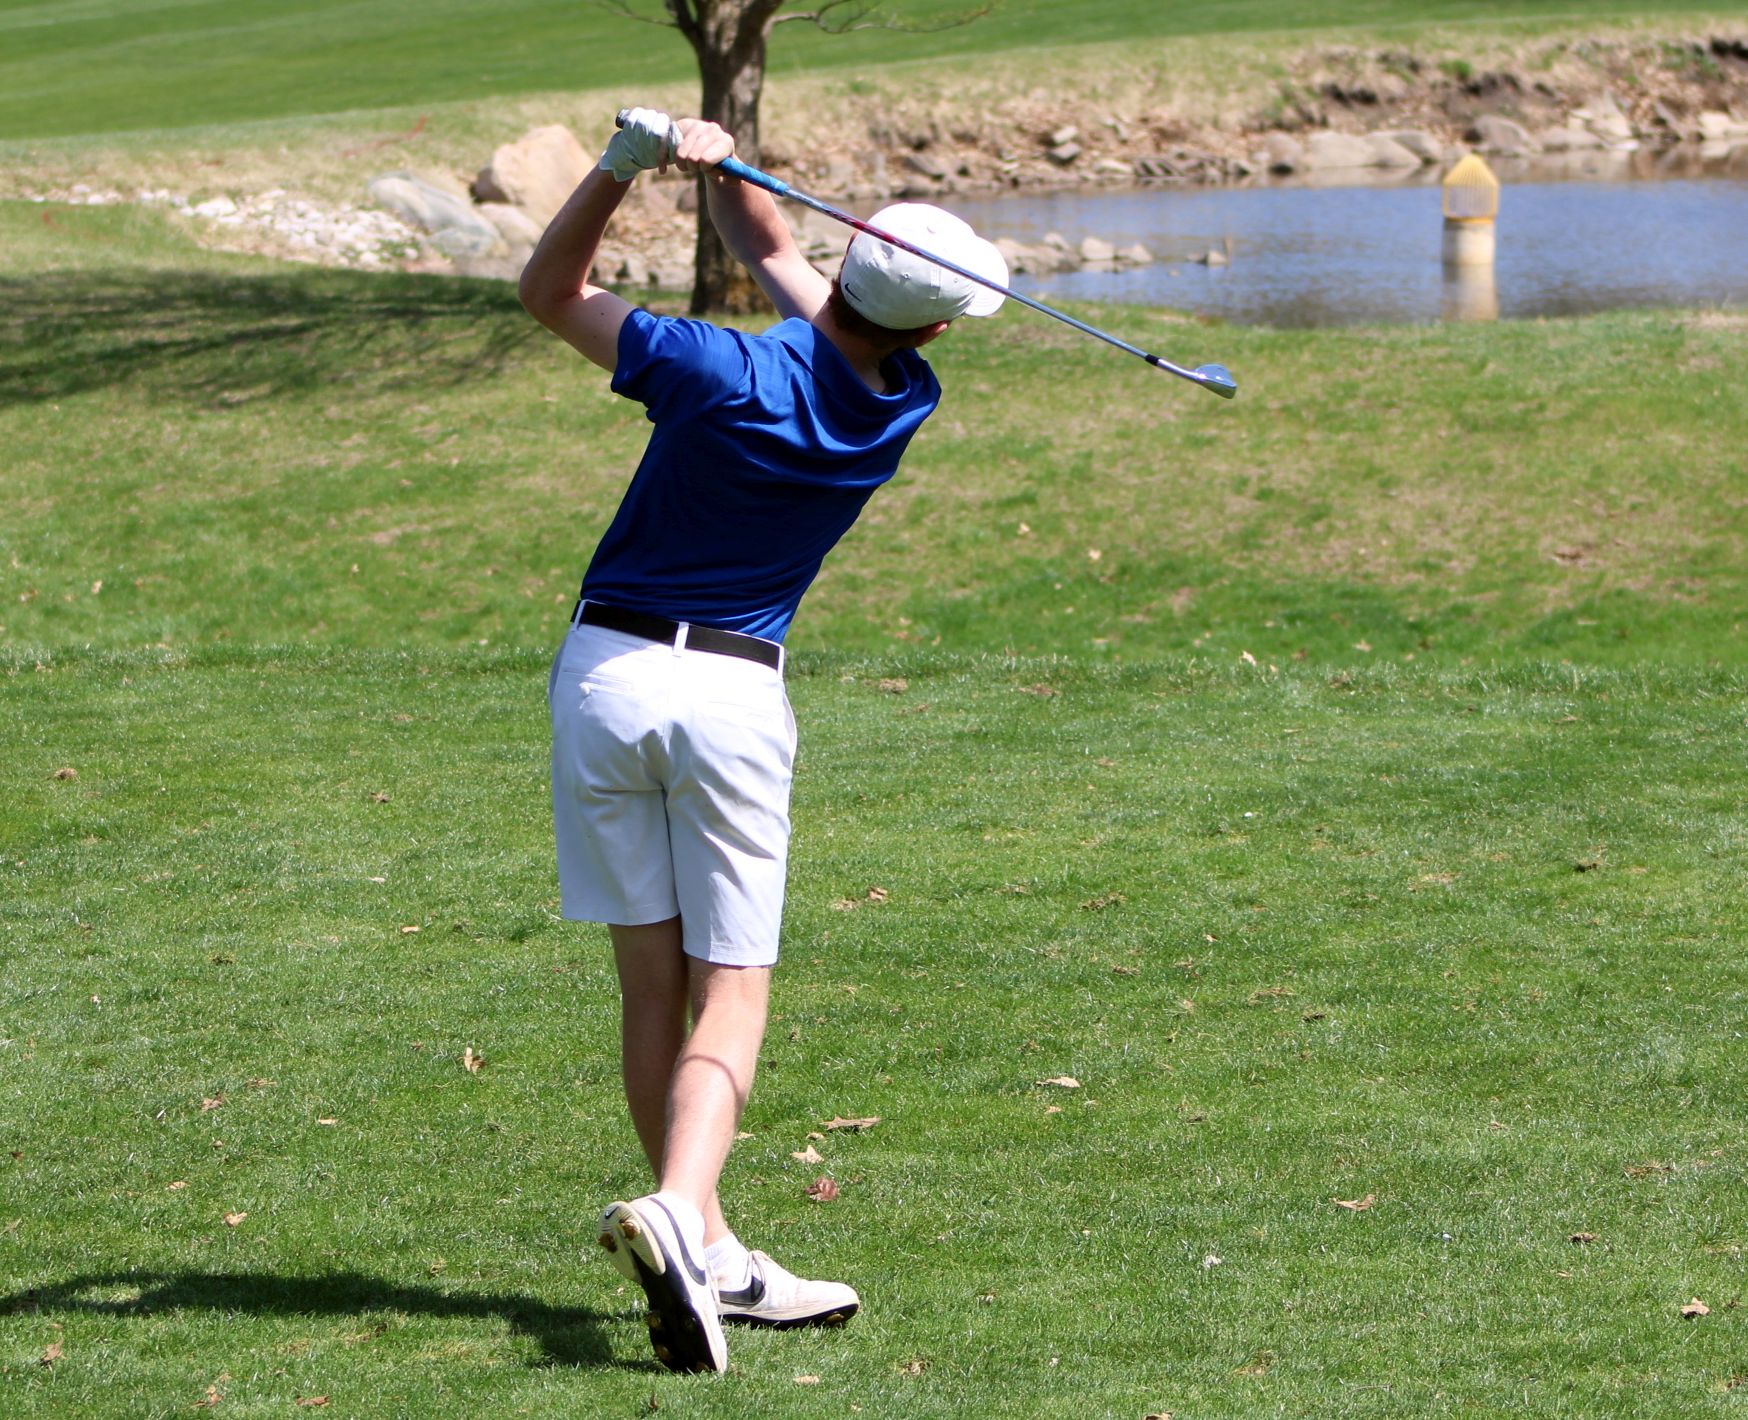 NIACC's Bryce Malchow tees off Friday at the Irv Warren Memorial Golf Course.